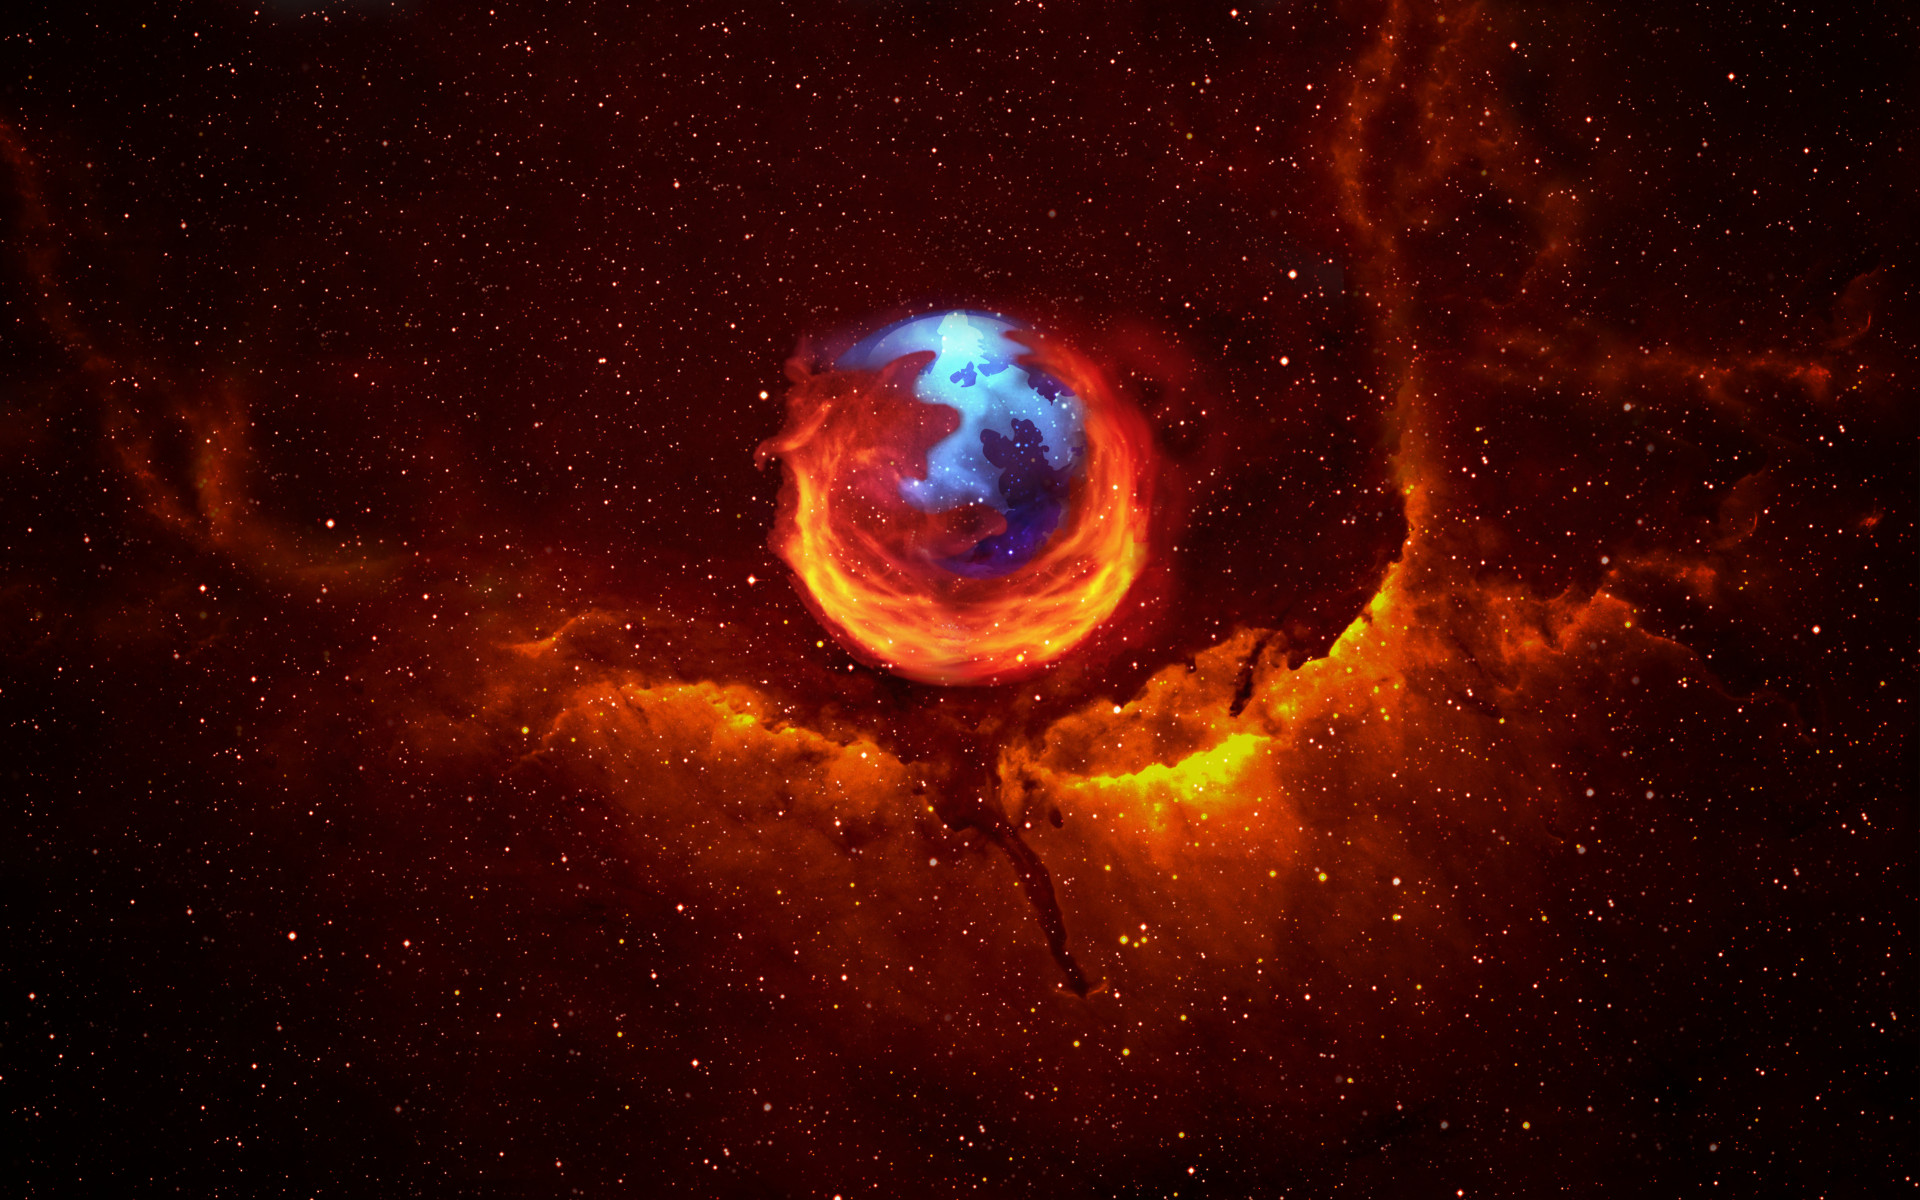 Firefox Wallpaper For In High Definition